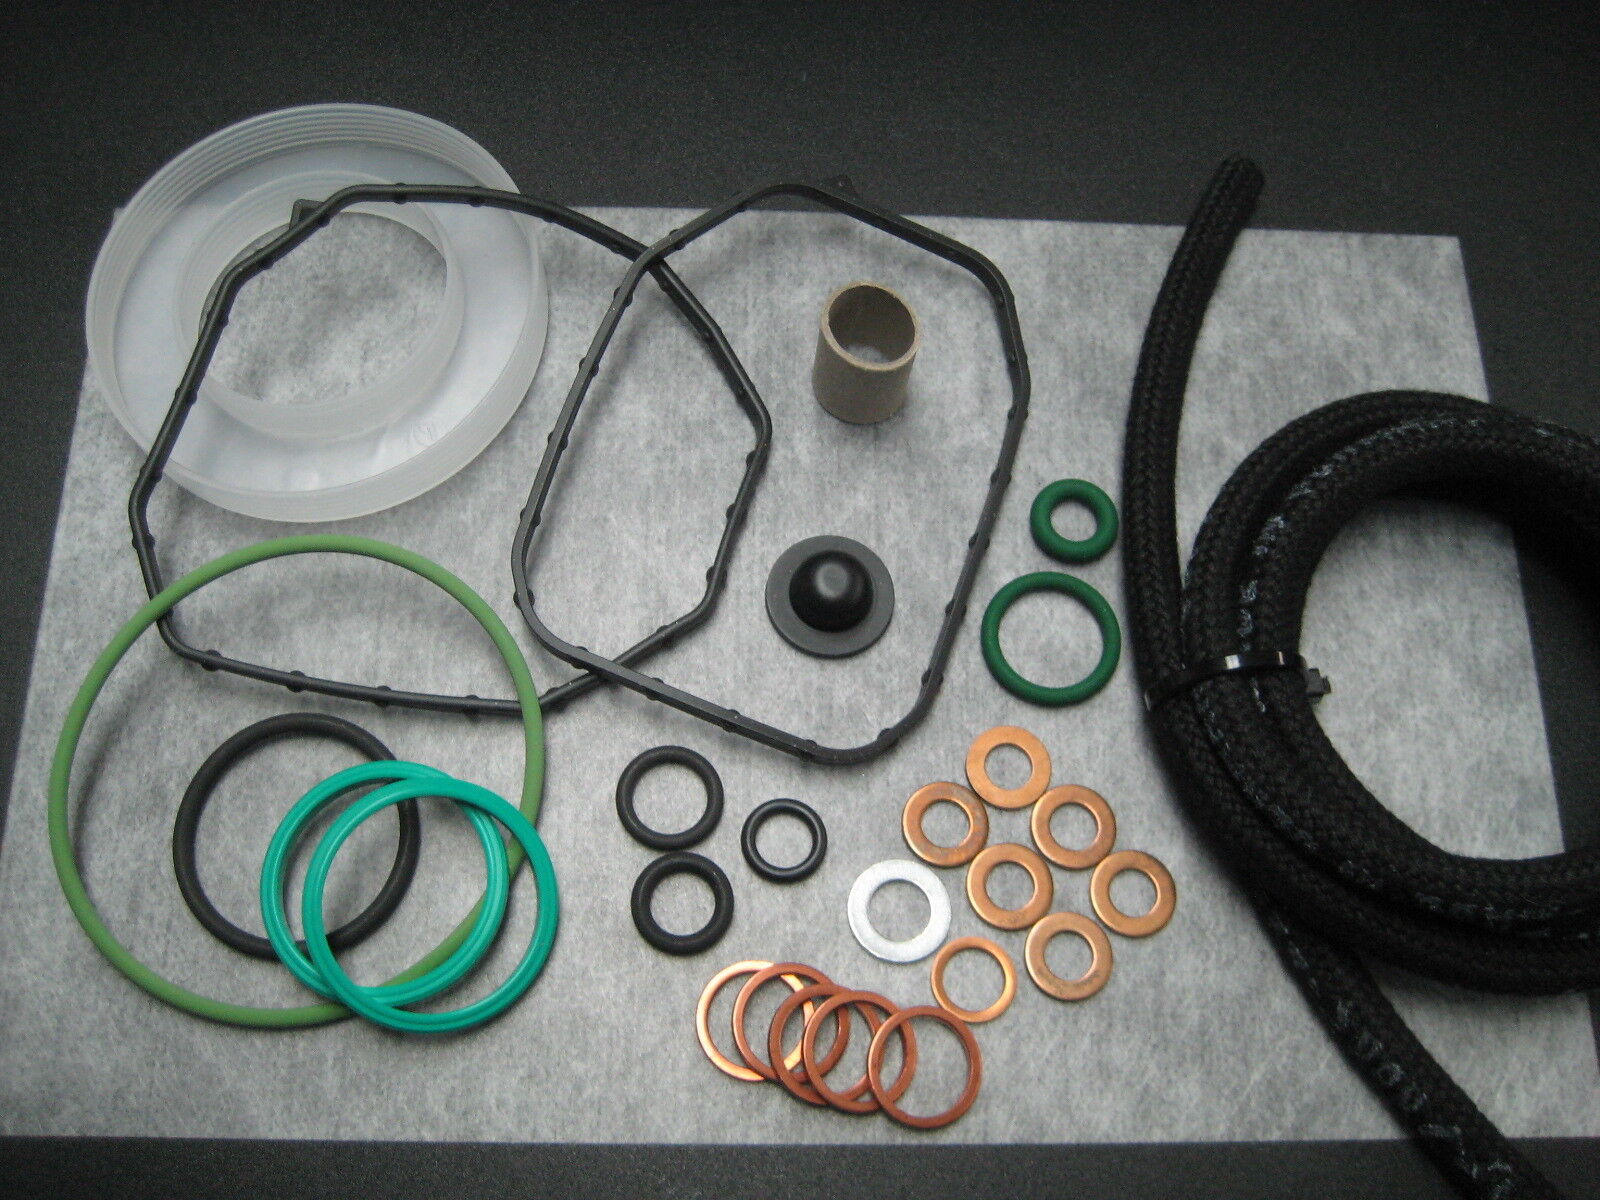 VW 1.9 TDI Diesel Injection Pump Seal Kit + Hose - Made in Germany - Ships Fast